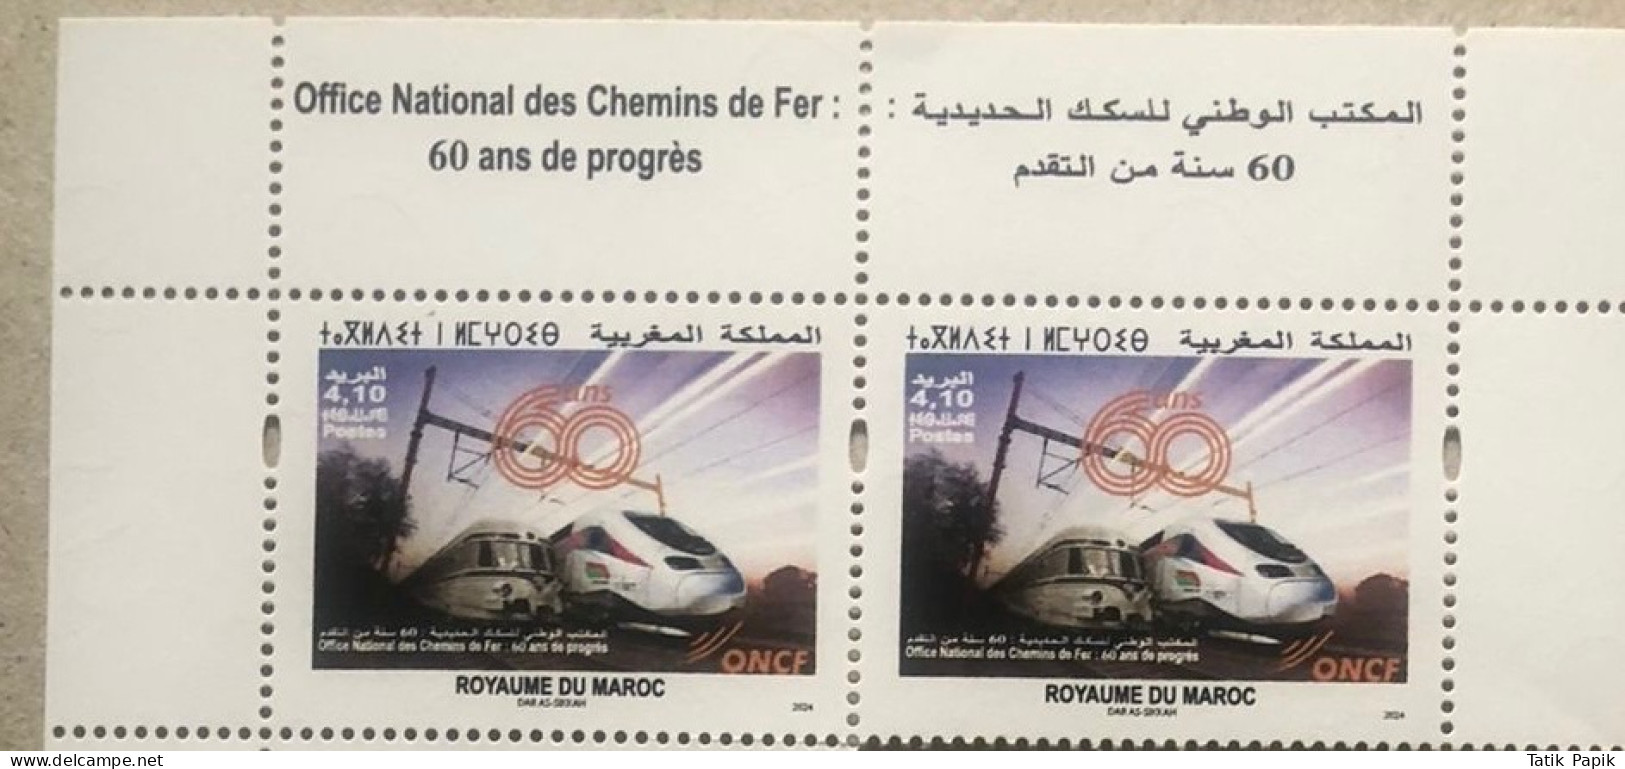 2024 Maroc Morocco 60th Anniversary Train Railway Station Services High Speed Top Pair Title MNH - Morocco (1956-...)